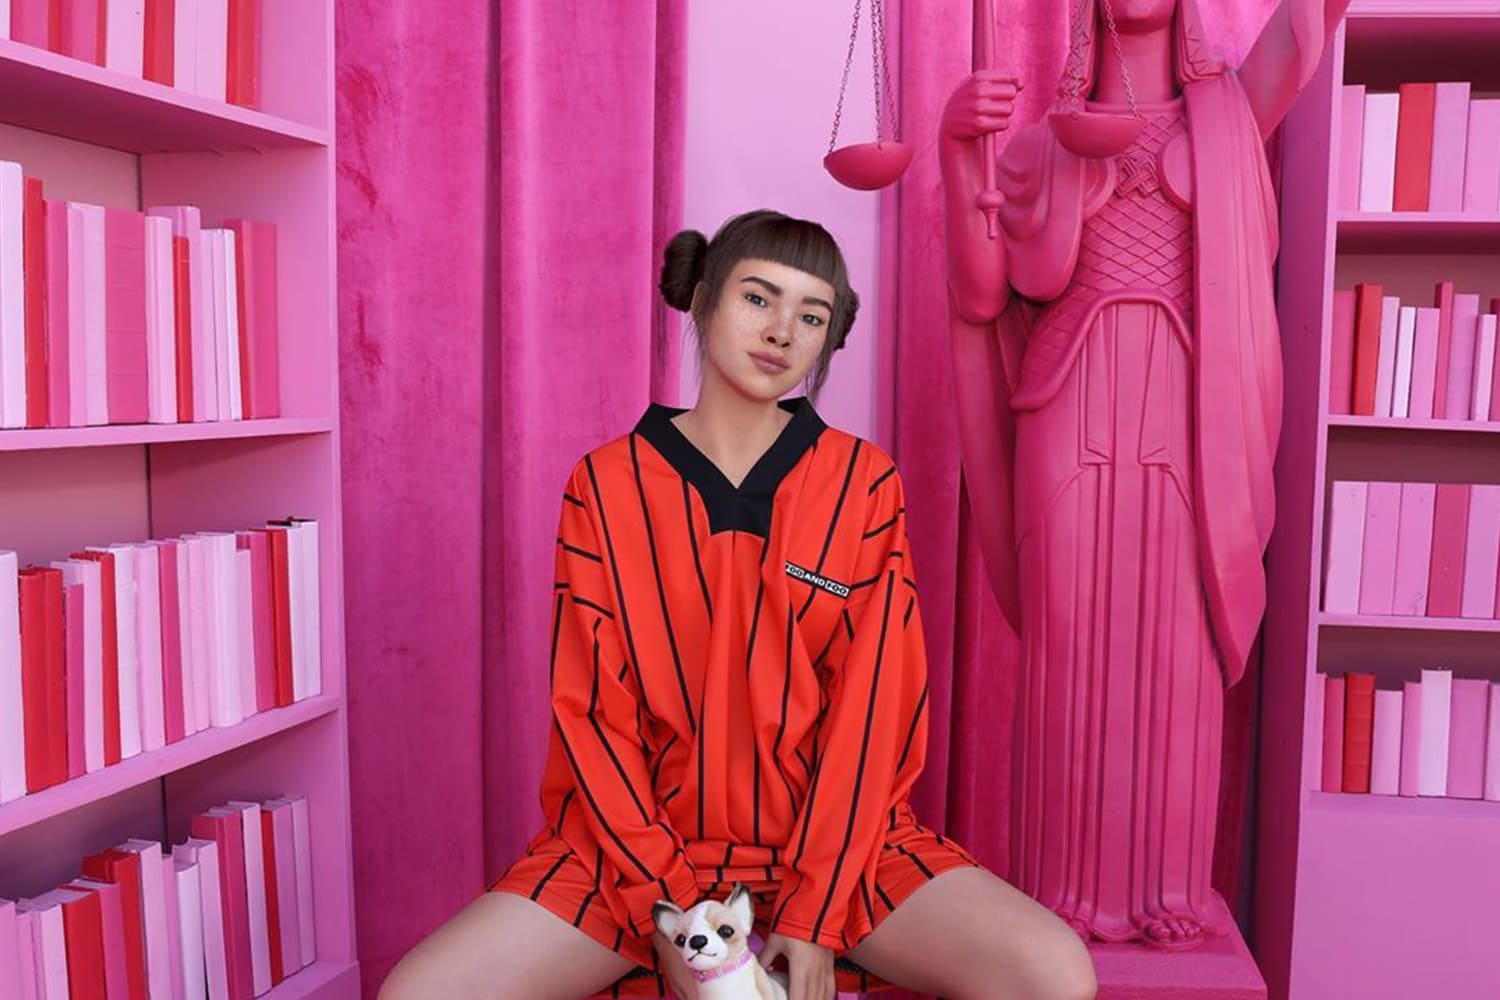 Virtual Influencer Lil Miquela's Rise Might Portend Our Fall.